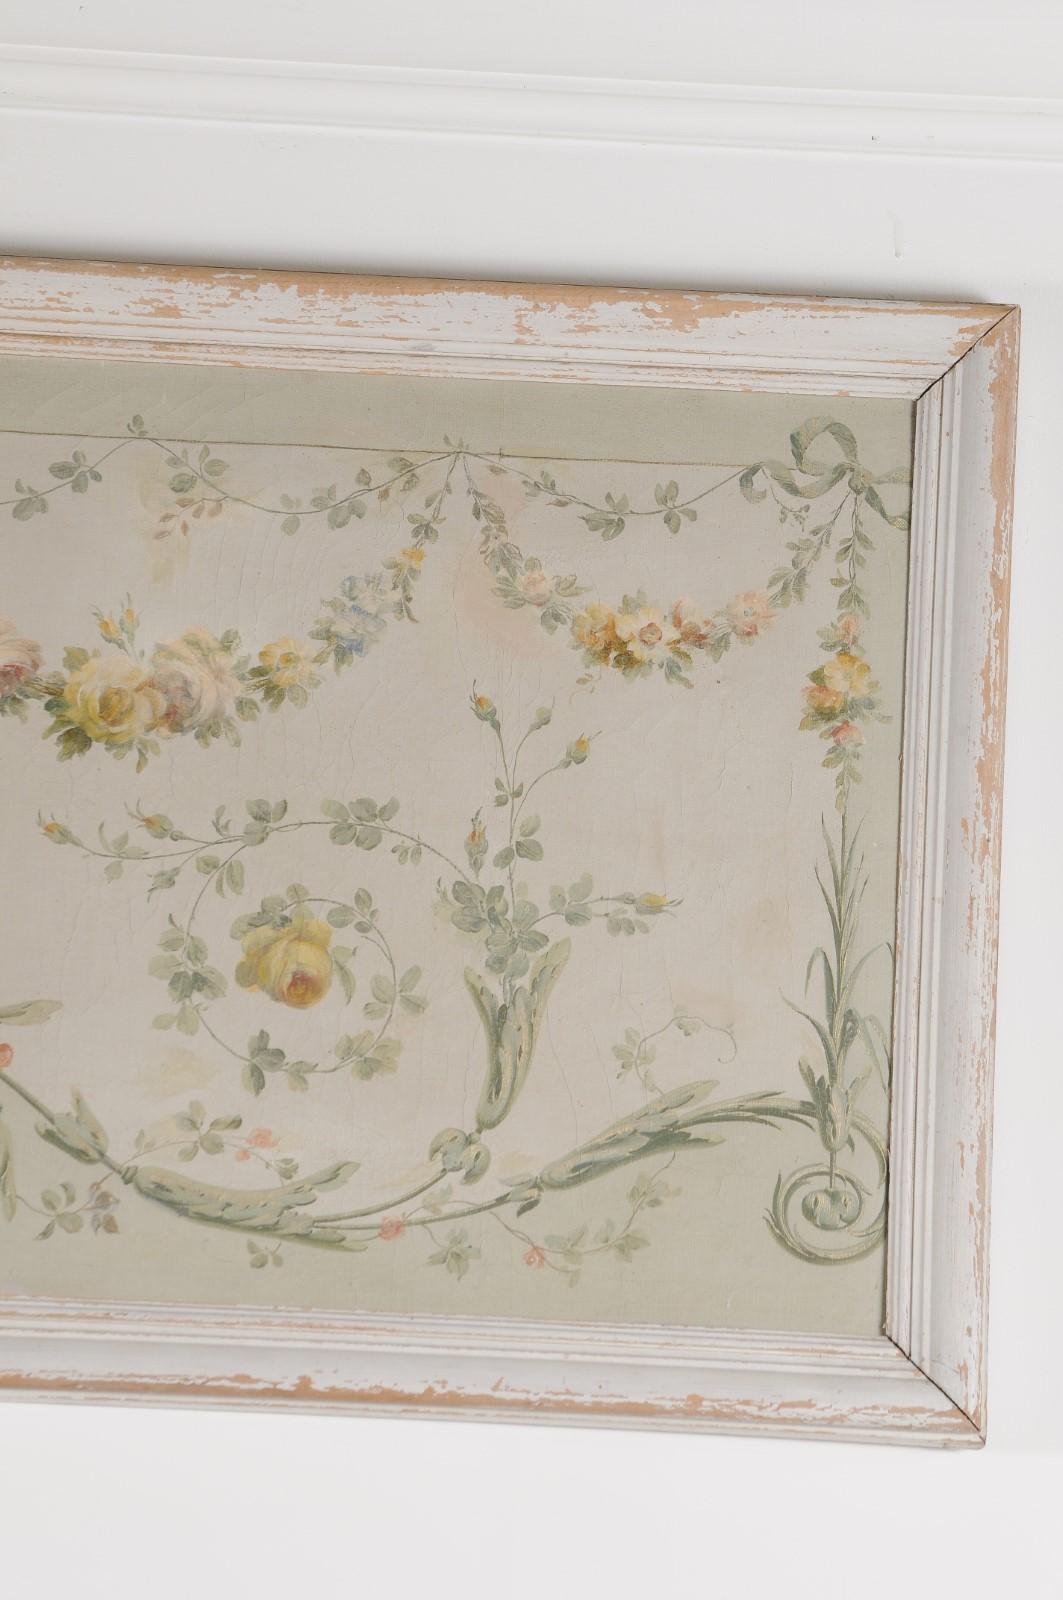 Pair of French Napoléon III 1860s Oil on Canvas Overdoors with Floral Garlands In Good Condition For Sale In Atlanta, GA